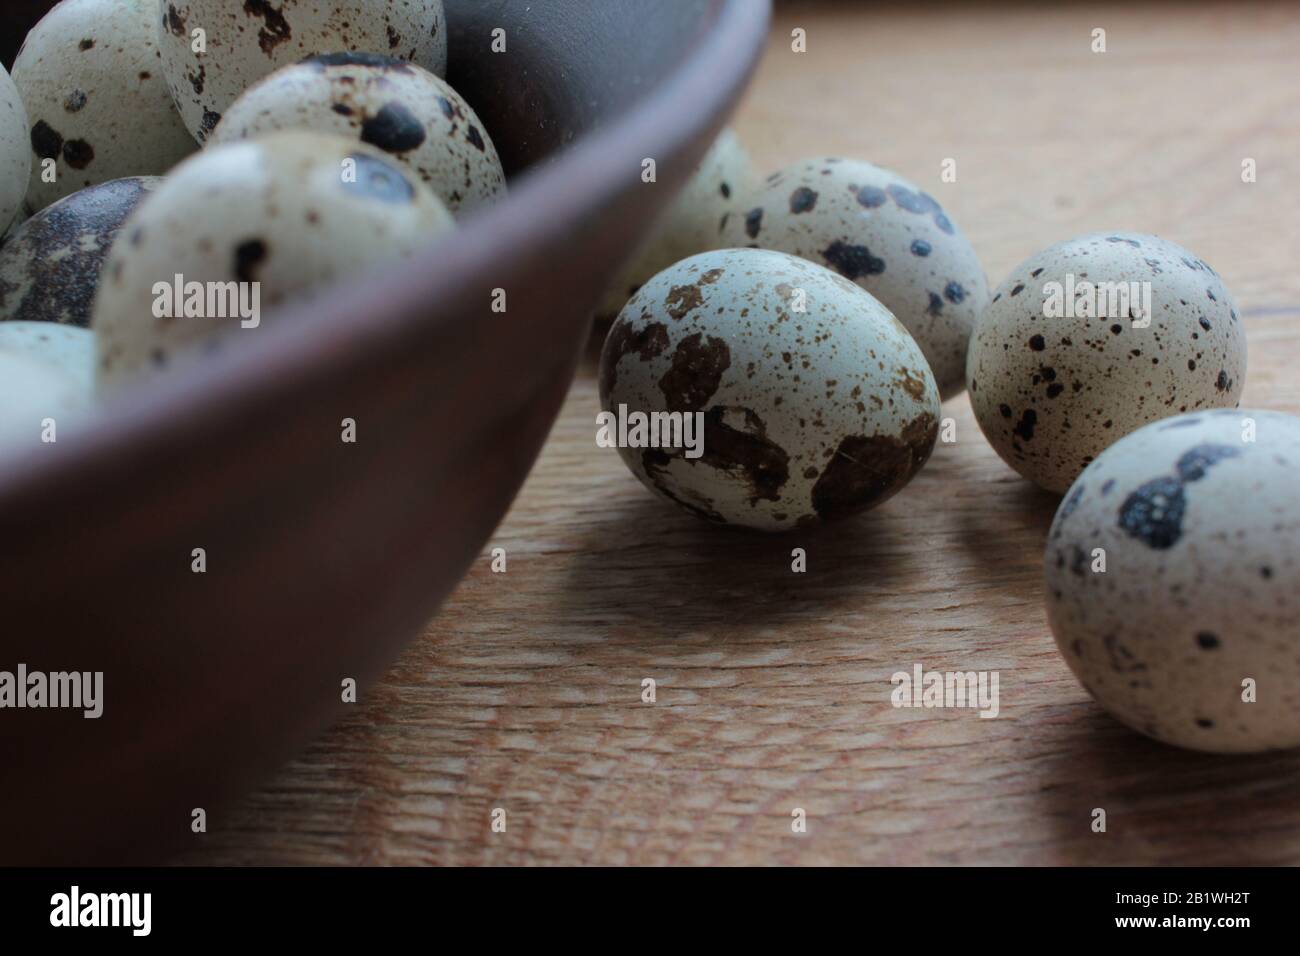 Closeup of quail eggs in brown ceramic bowl on wooden table Stock Photo